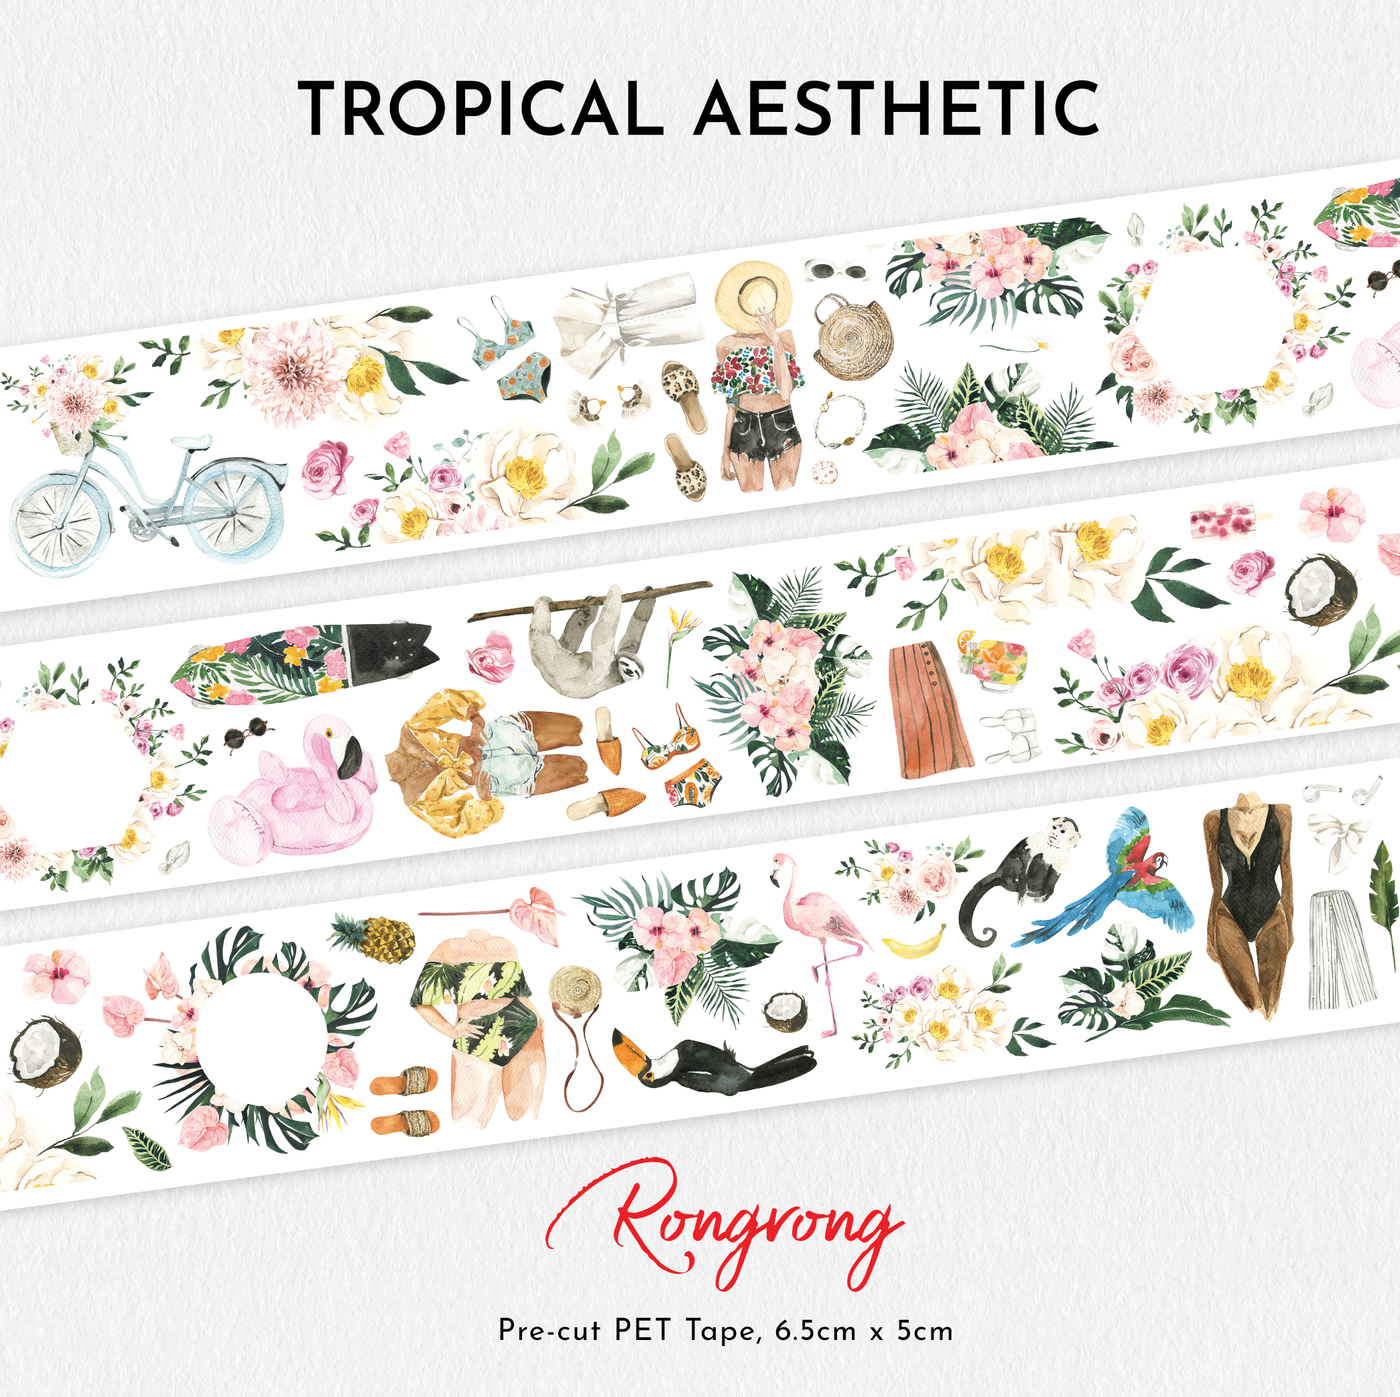 Rongrong Tropical Aesthetic PET Tape